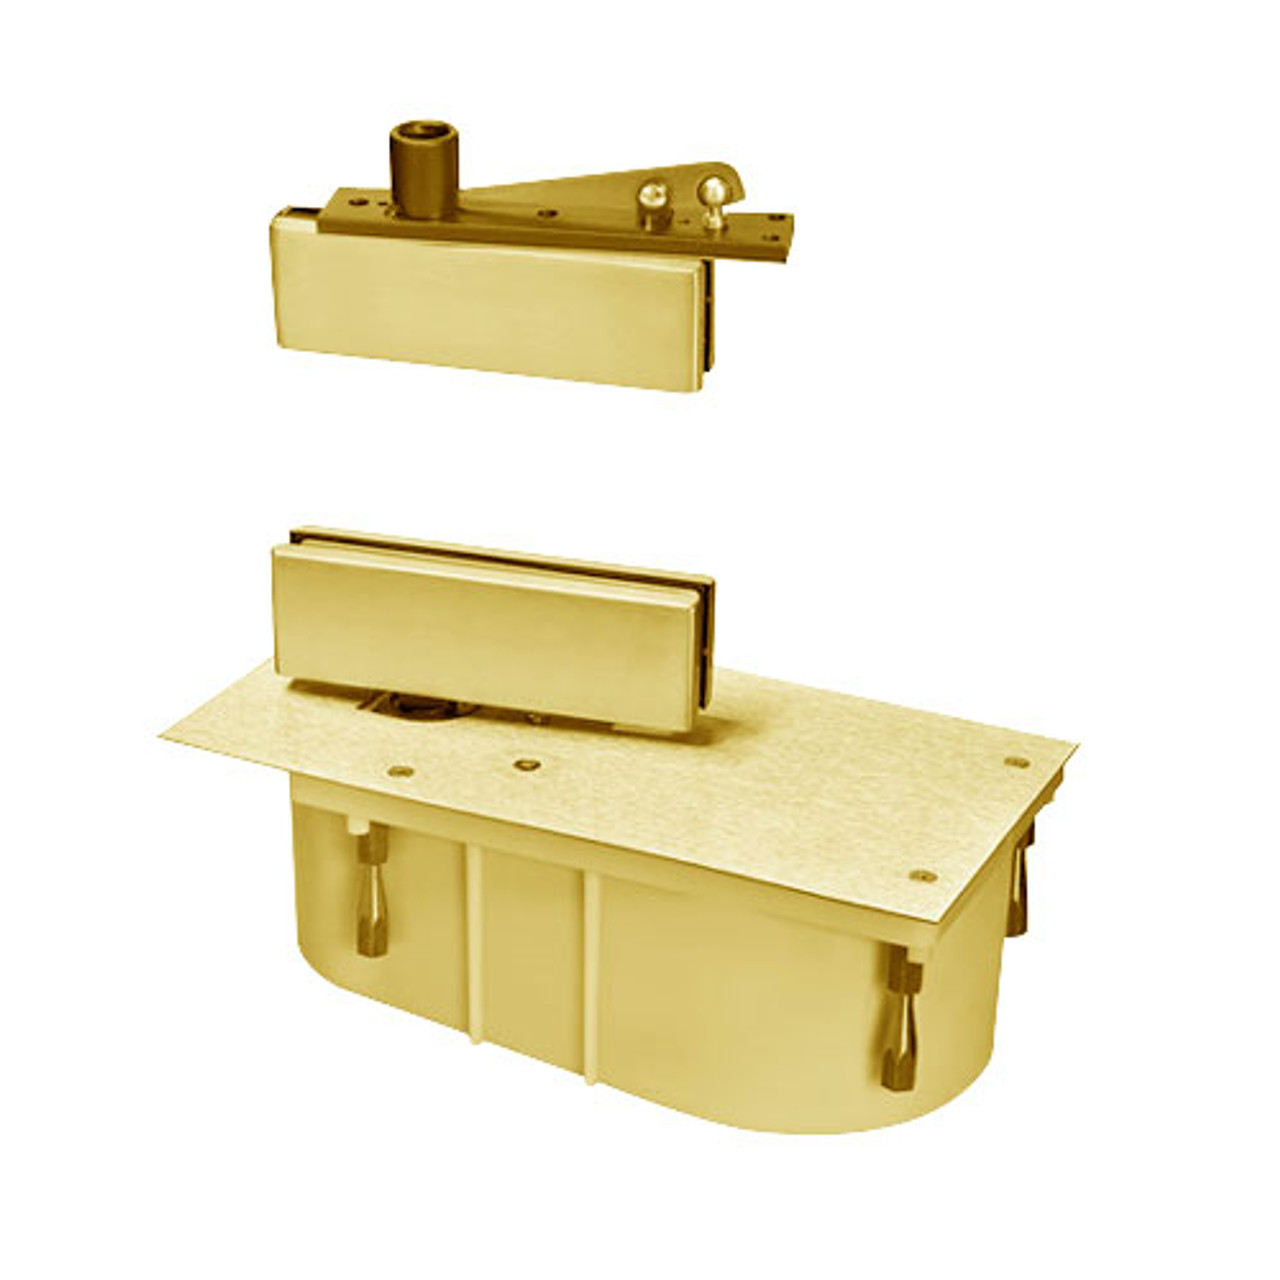 428-95N-LH-605 Rixson 428 Series Heavy Duty Single Acting Center Hung Floor Closer with Patch Fittings in Bright Brass Finish